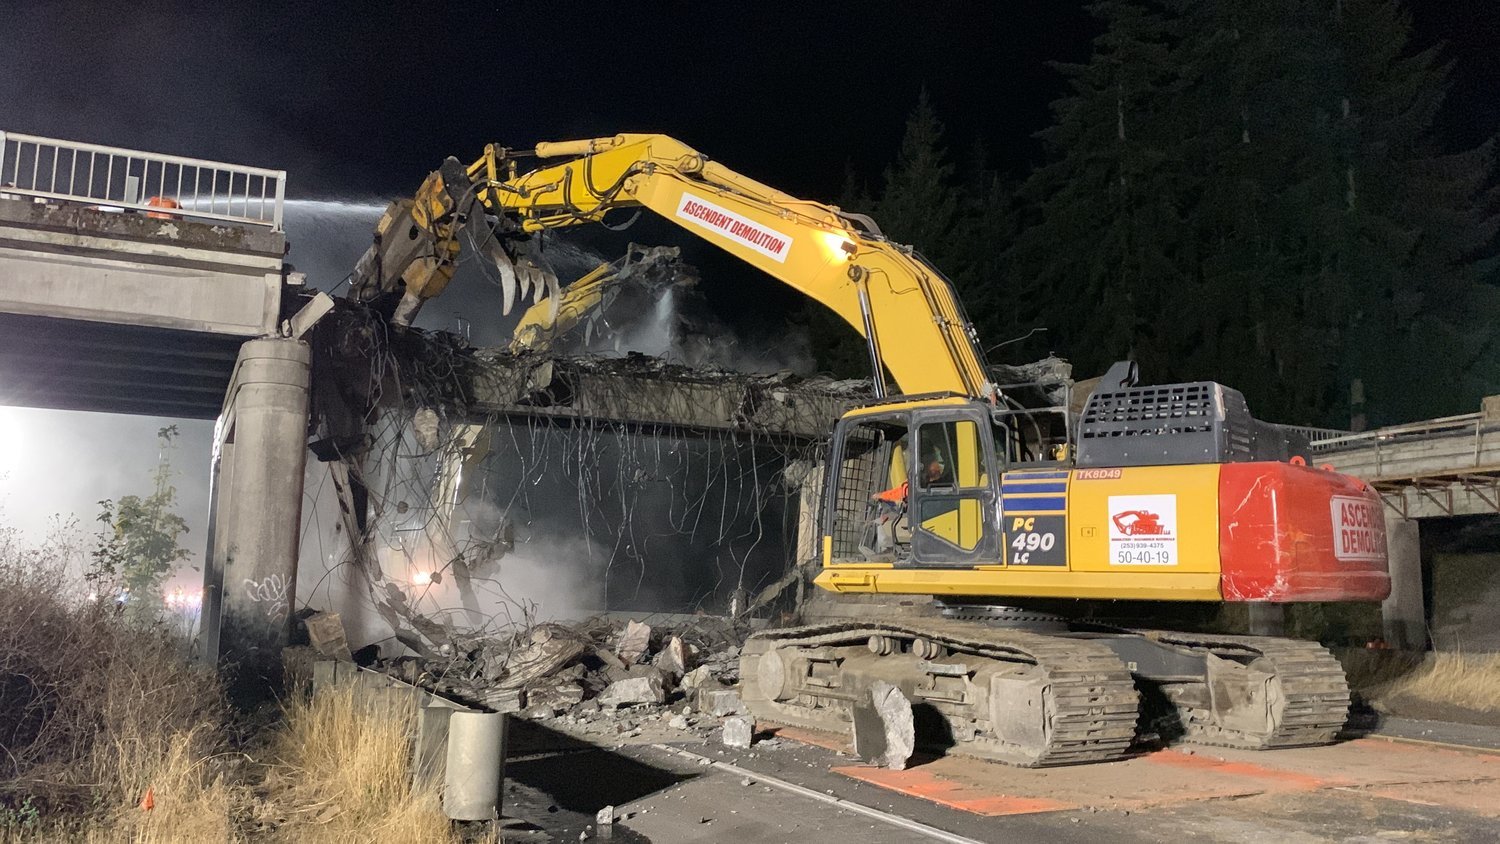 Washington state Department of Transportation Chehalis Area Engineer Paul Mason provided this photo of the state Route 506 Interstate 5 overpass being demolished in late September.